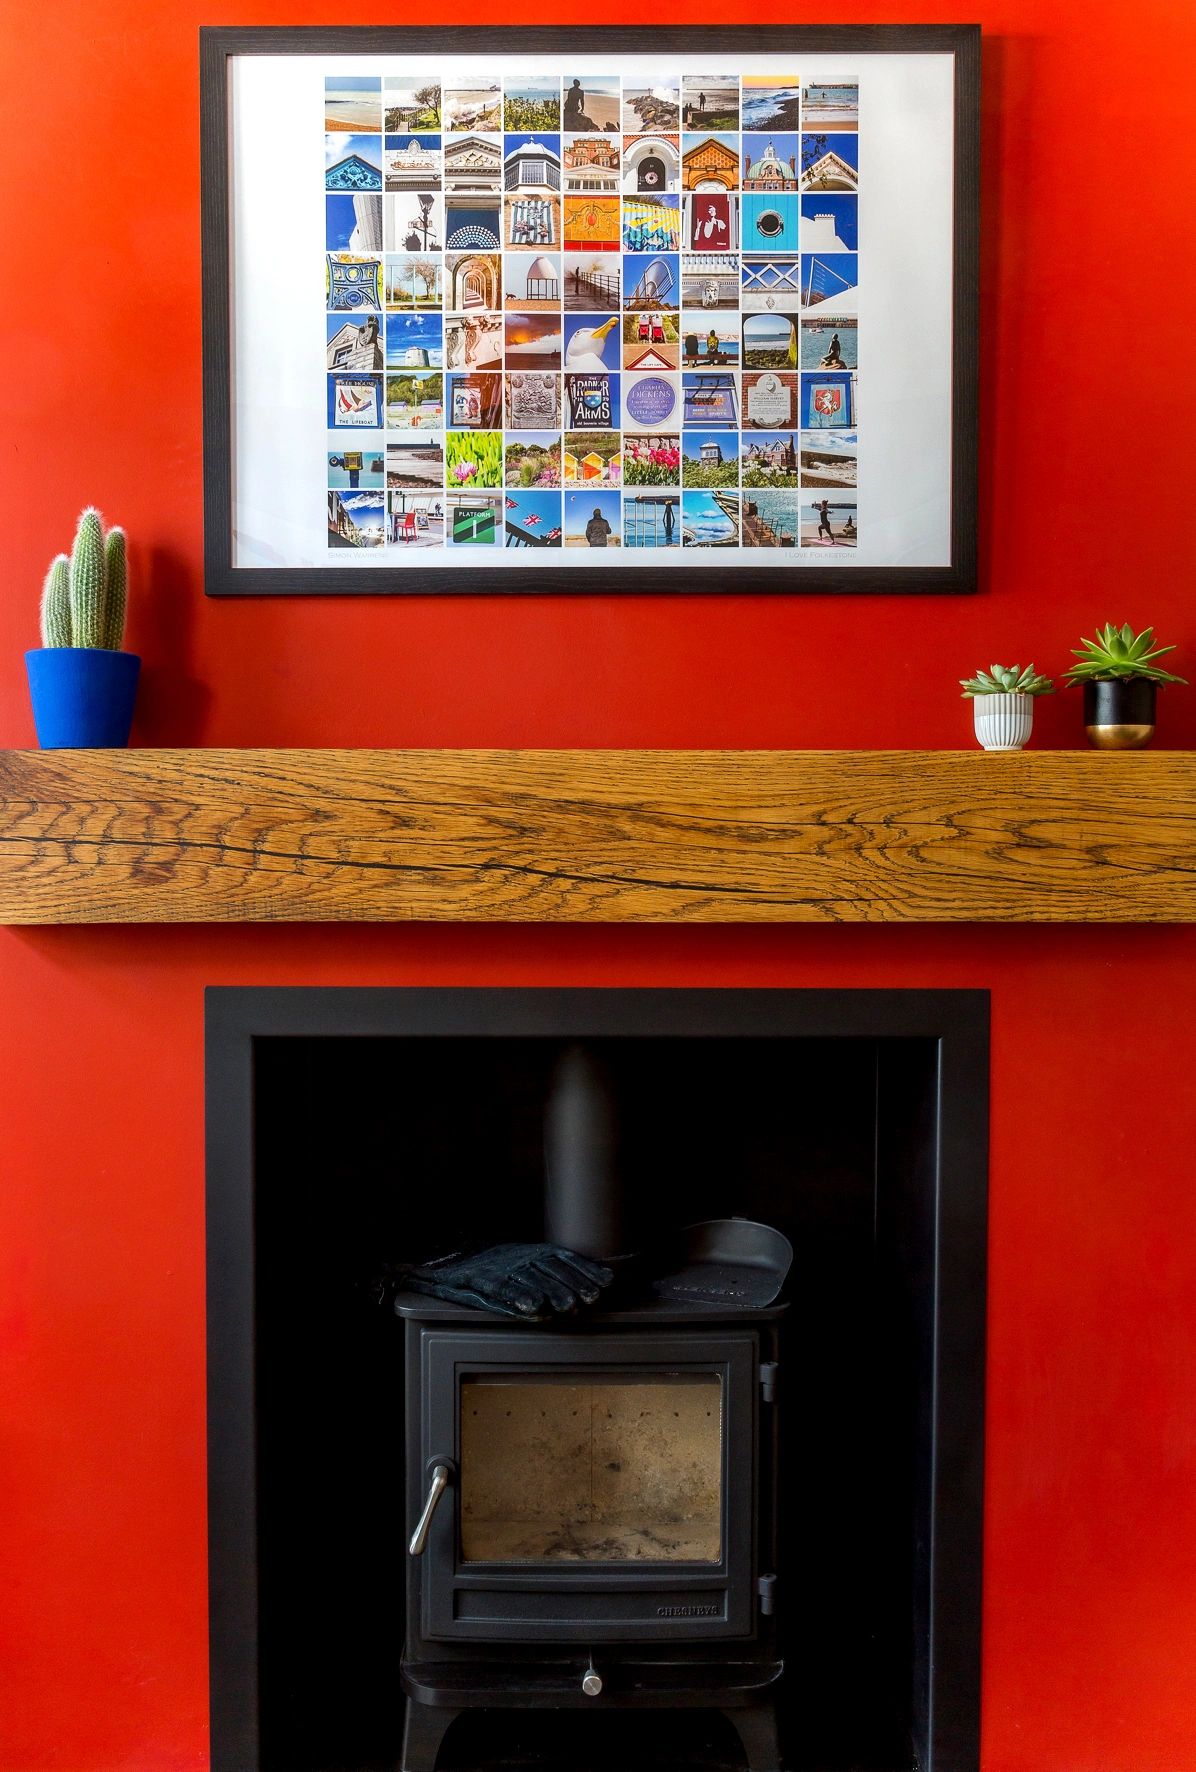 This stunning photographic print of Folkestone looking wonderful in this colourful interior. 